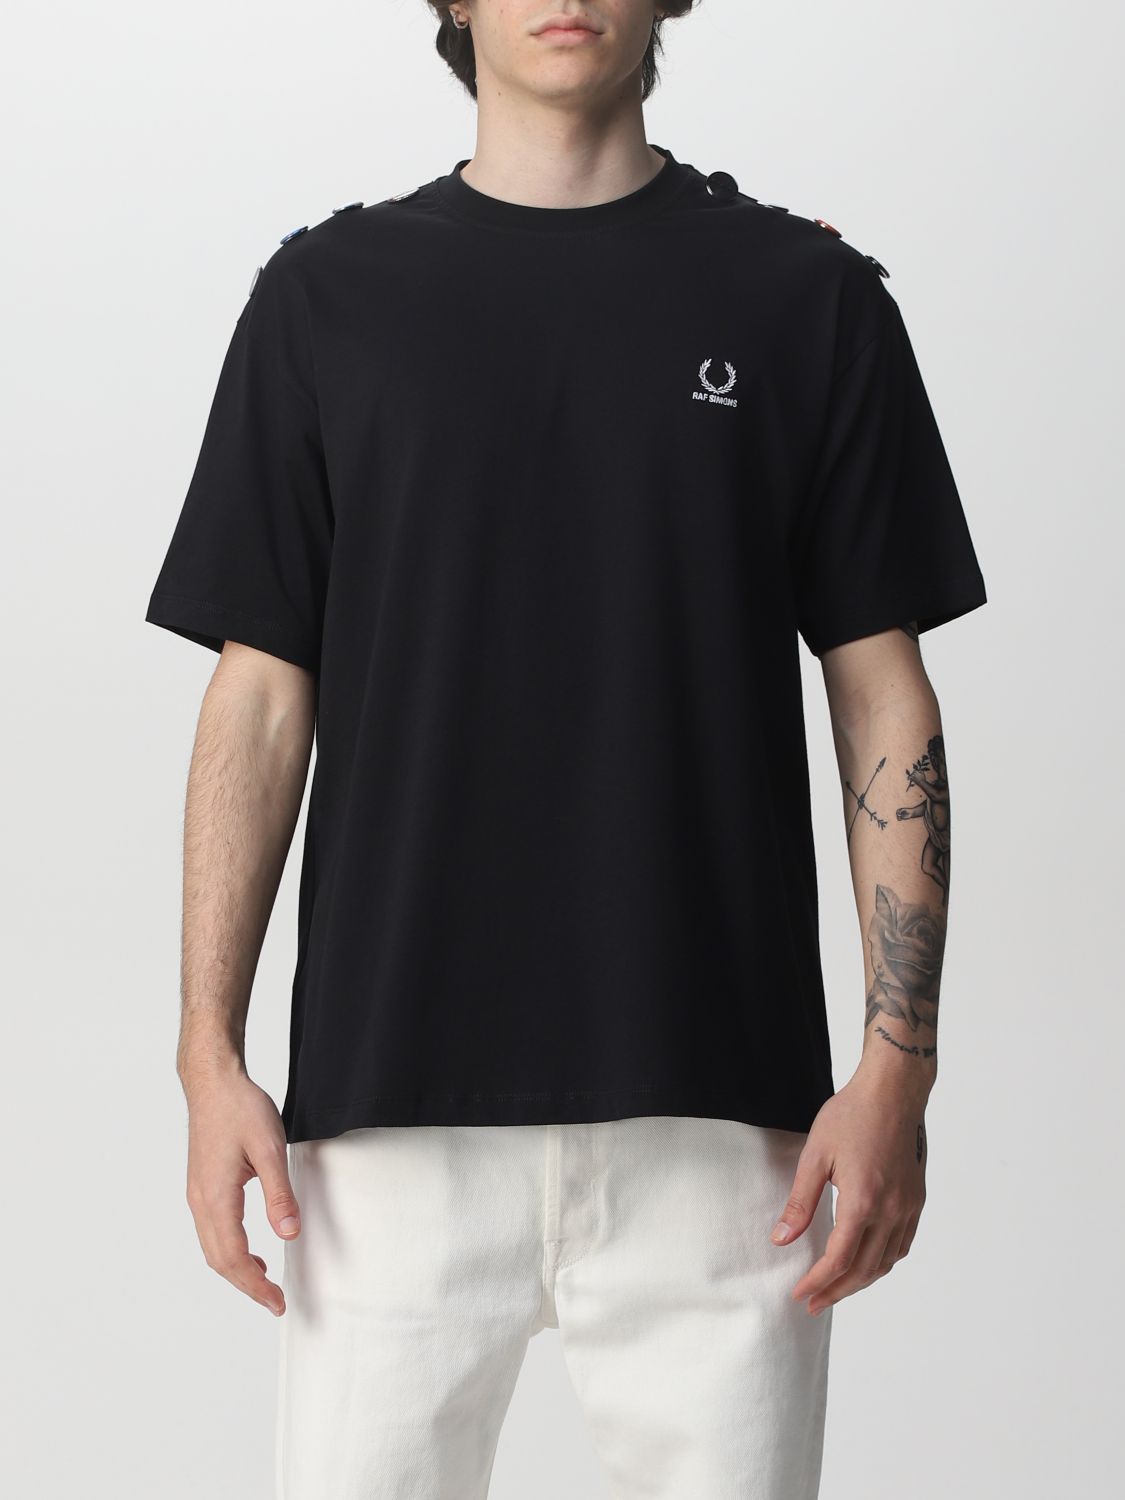 Tシャツ Fred Perry By Raf Simons: Tシャツ メンズ Fred Perry By Raf Simons ブラック 1